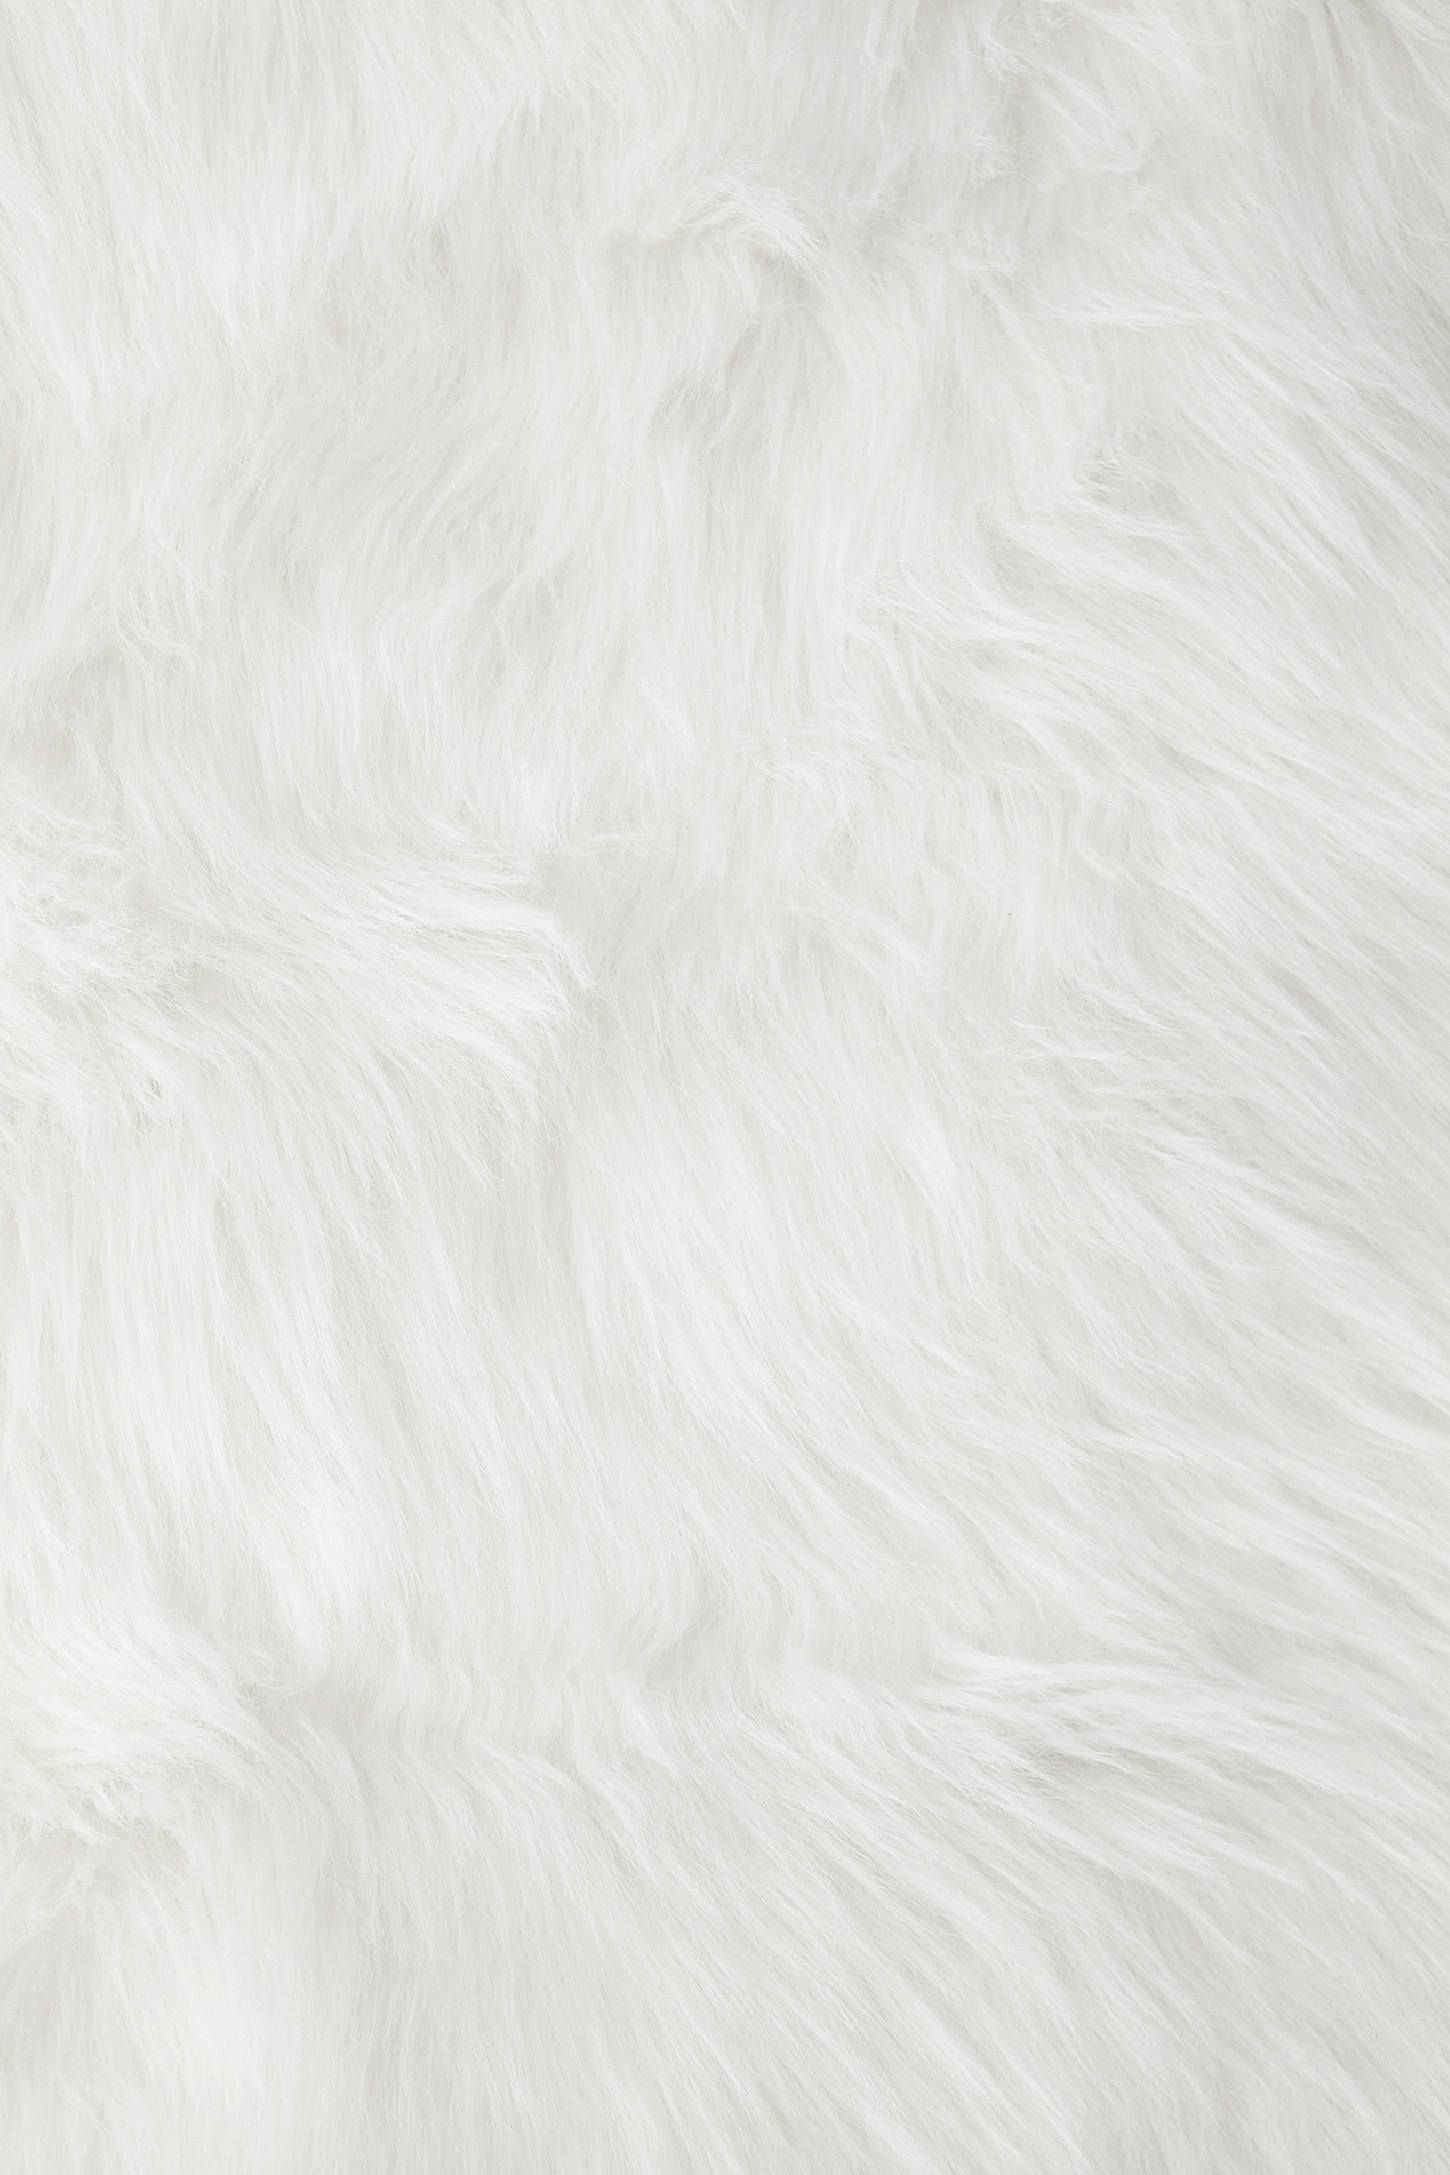 White fur background, Aesthetic design, Minimalist style, Soft and fluffy, 1450x2180 HD Phone